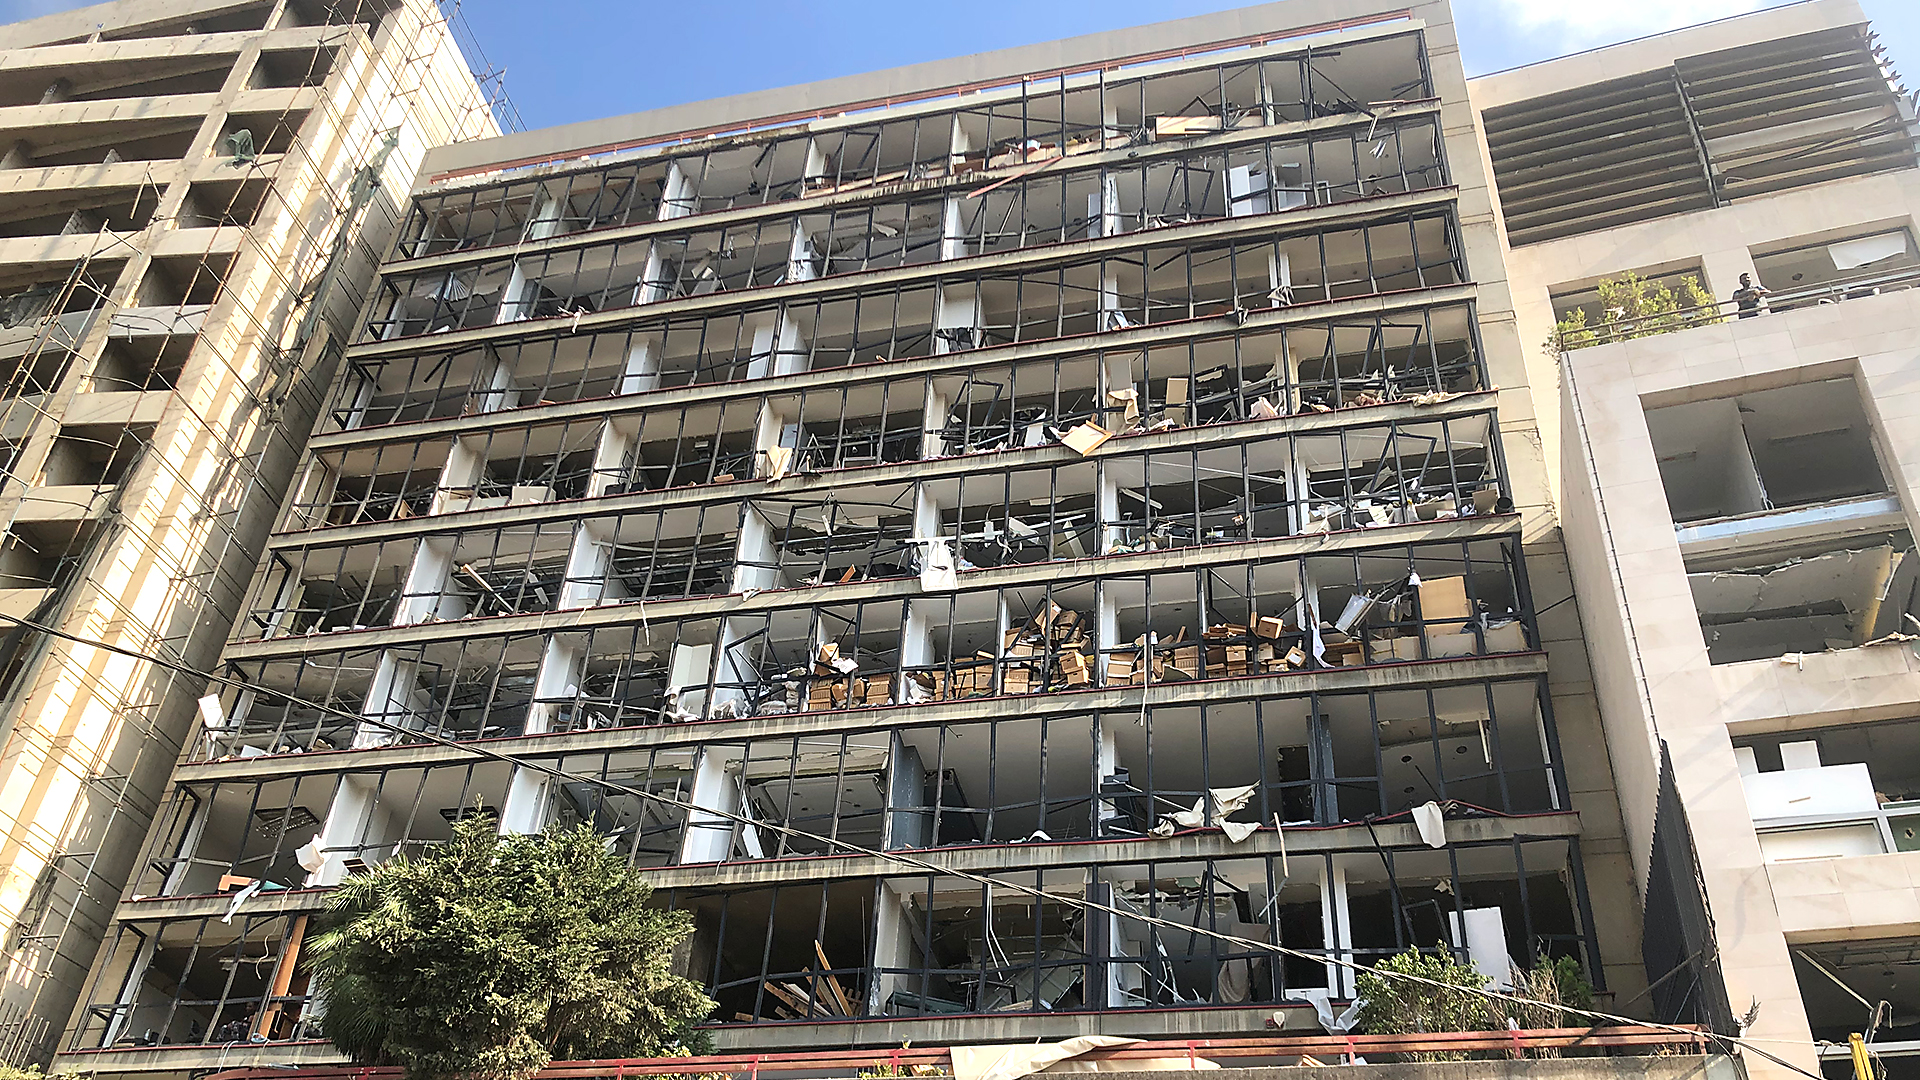 Destruction caused by the explosion in Beirut on August 4, 2020.